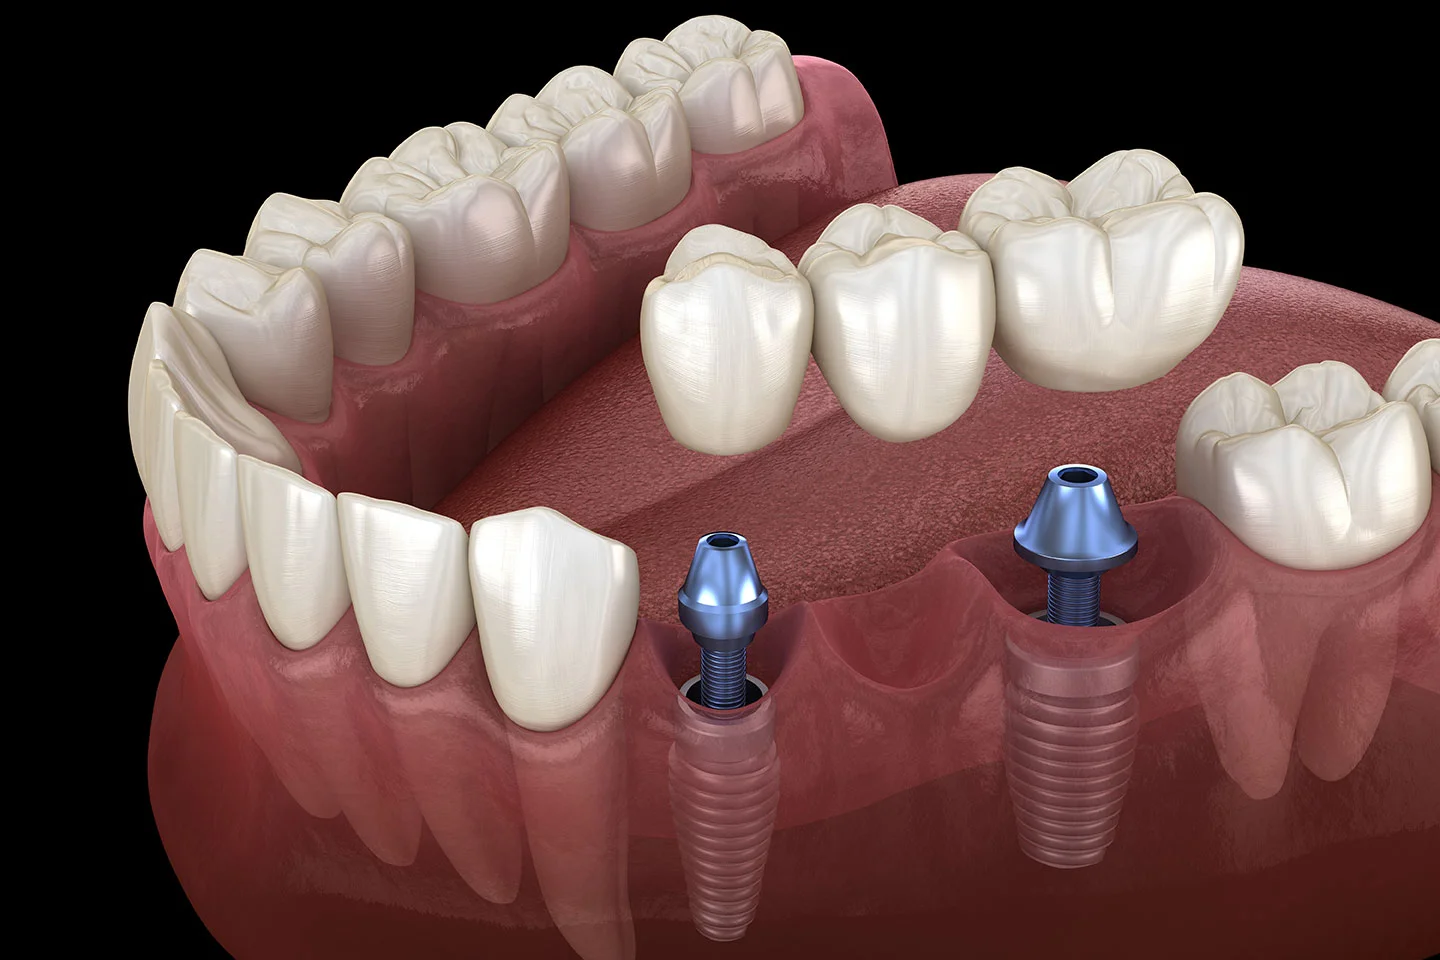 Dental Bridge vs Implant - Pros and Cons and How To Choose